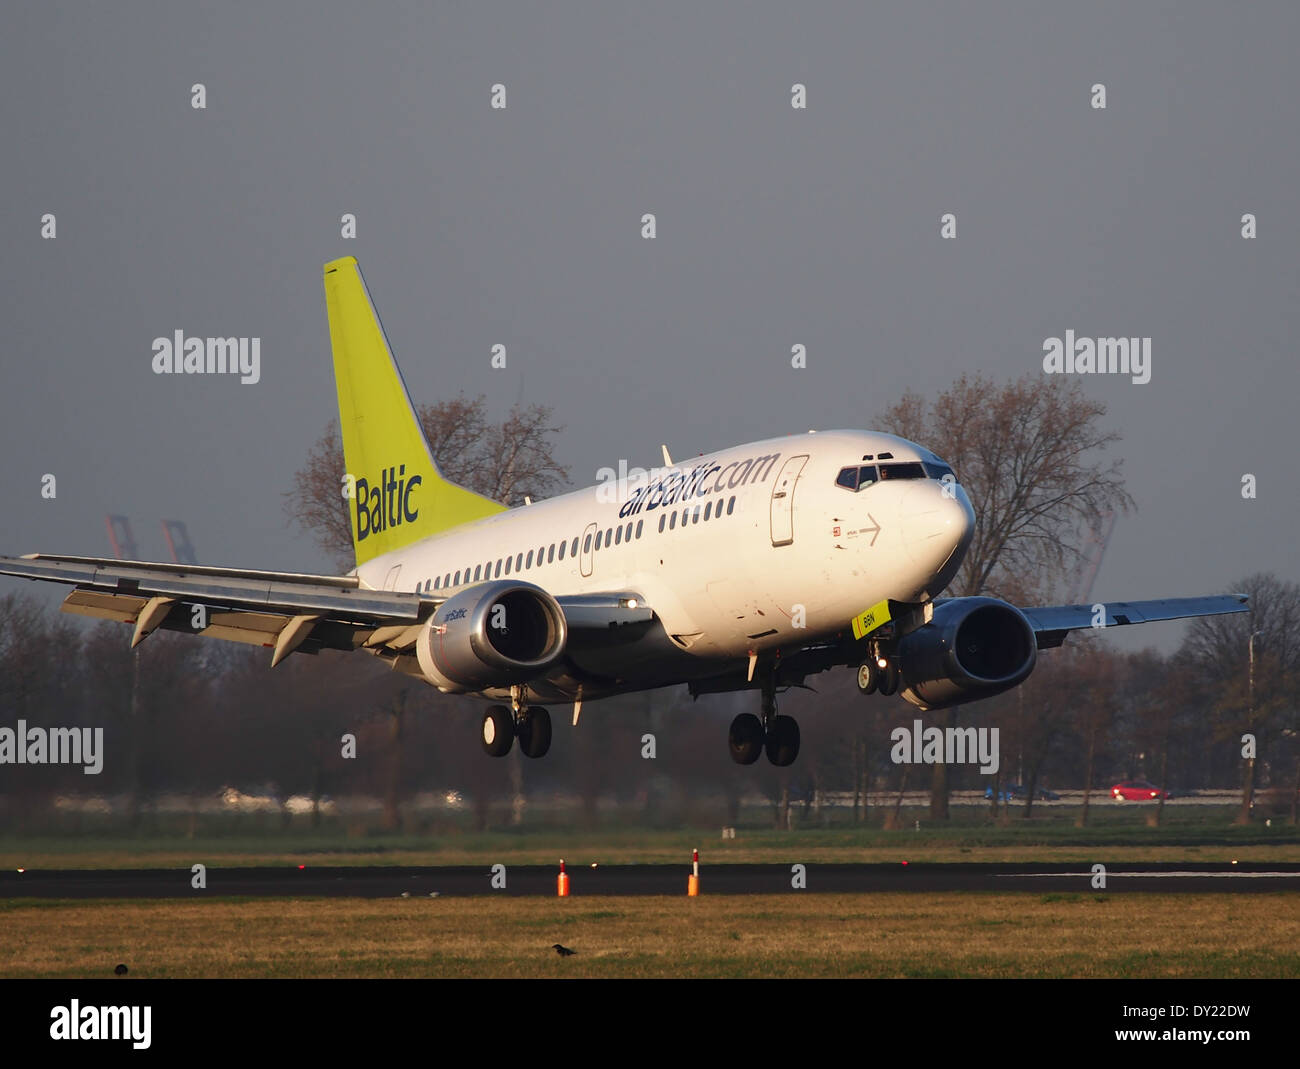 YL-BBN Air Baltic Boeing 737-522 - cn 26683, landing at AMS Amsterdam (Schiphol), pic1 Stock Photo